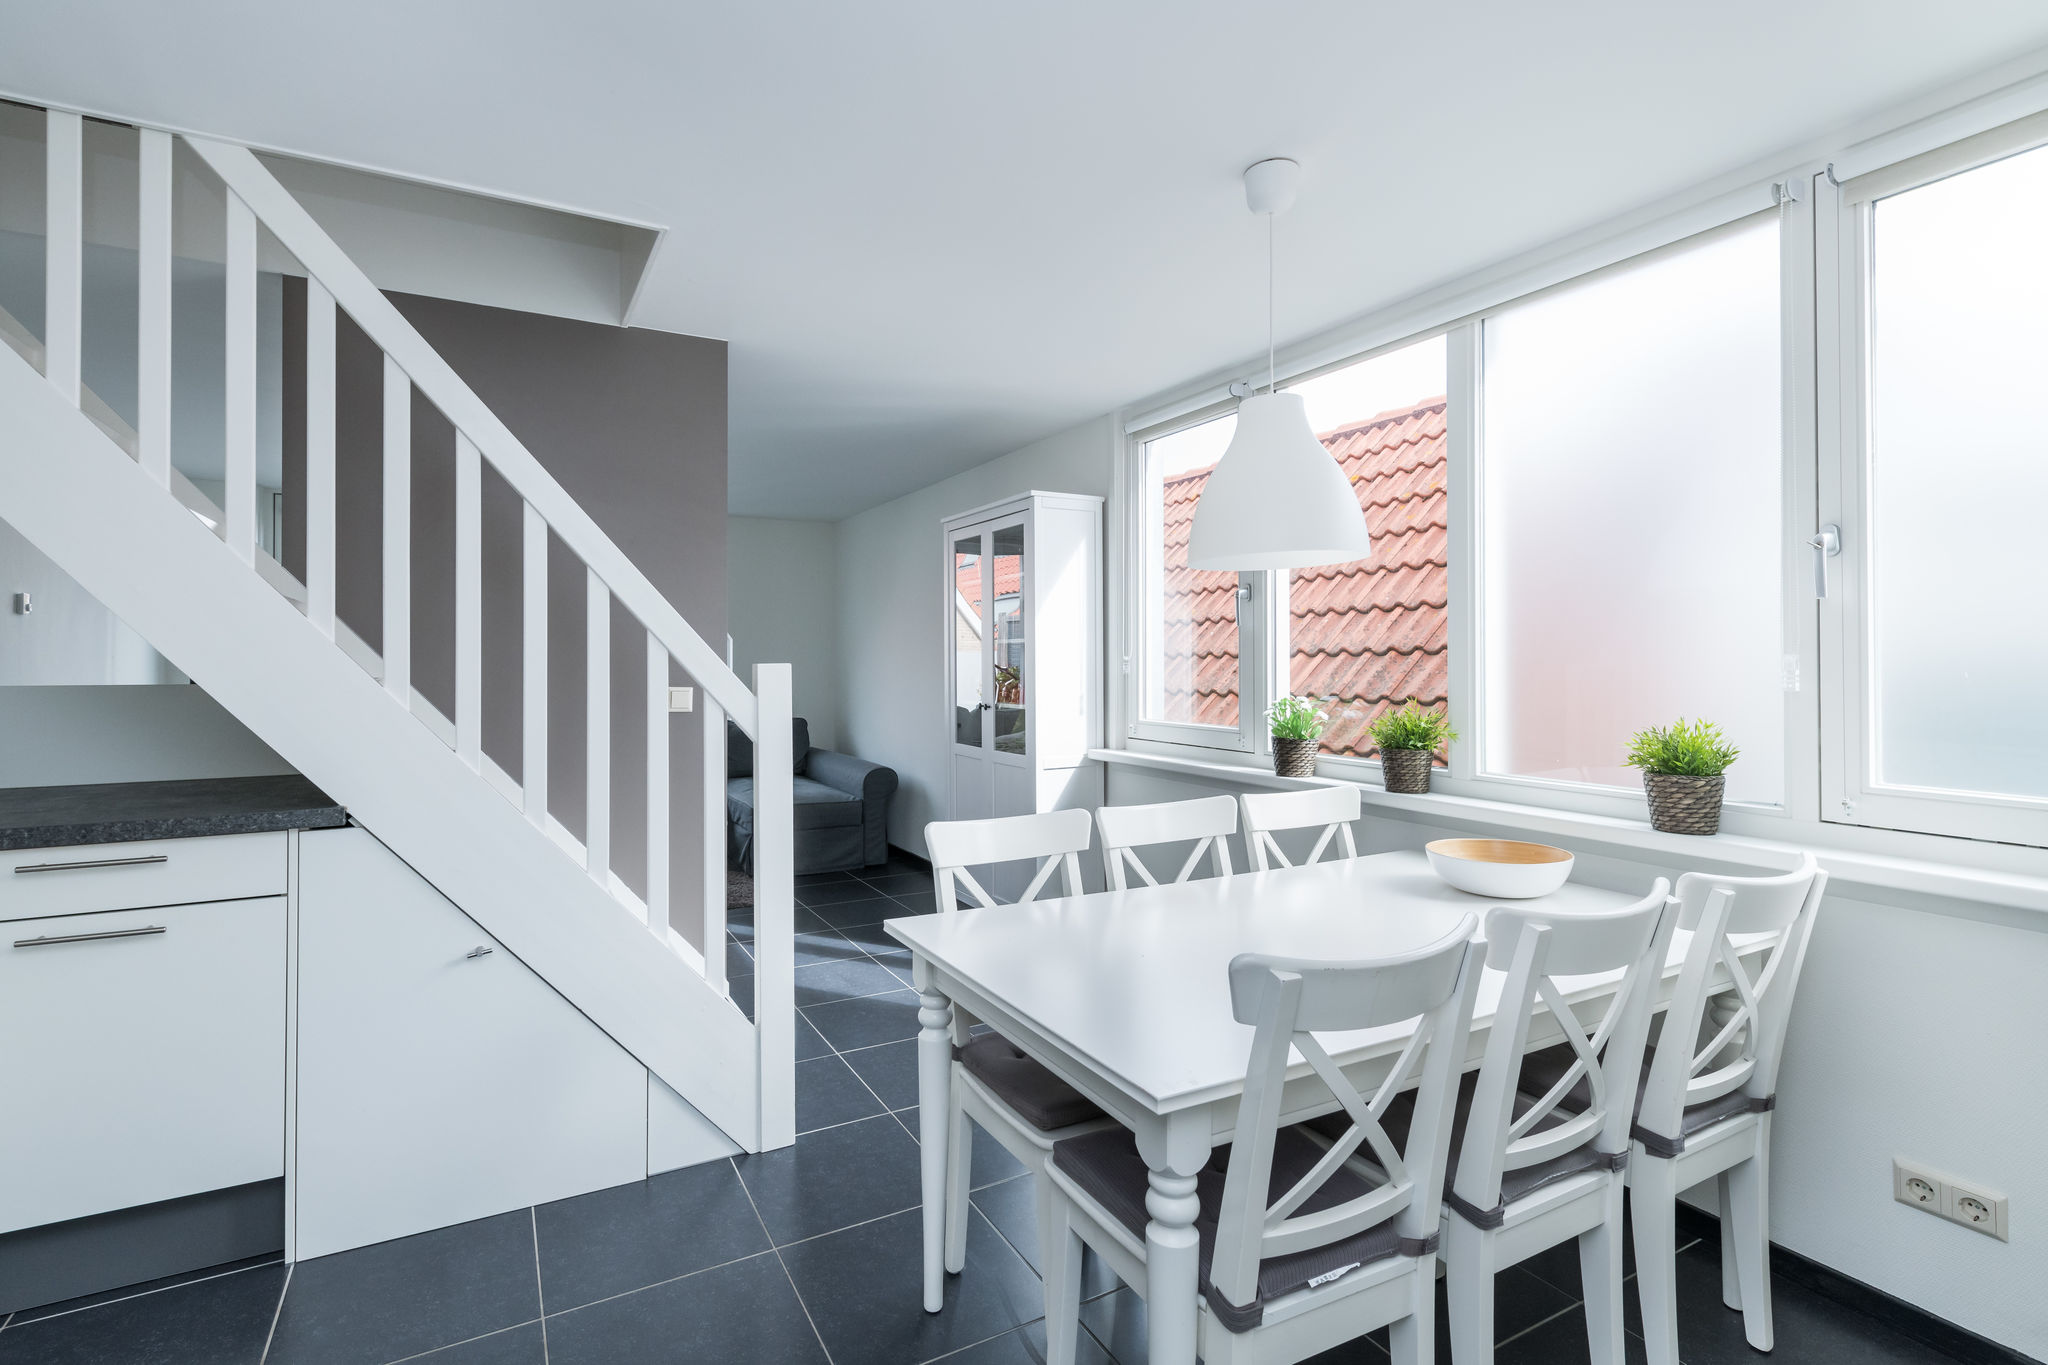 Magnificent 6-person apartment with roof terrace in Ouddorp town centre